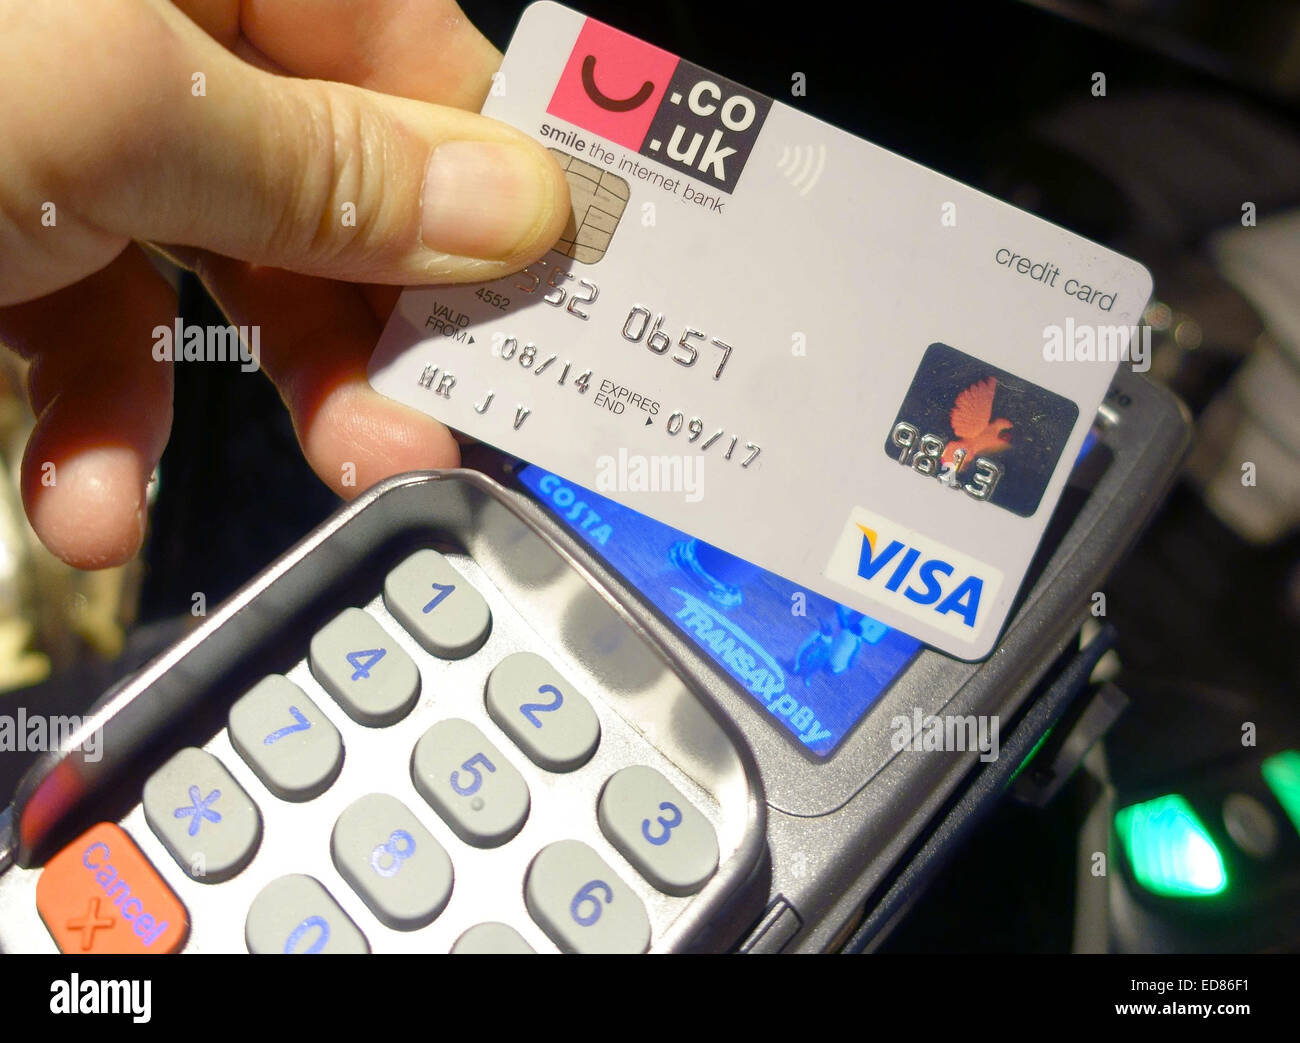 Making contactless payment with credit card in shop, London Stock Photo